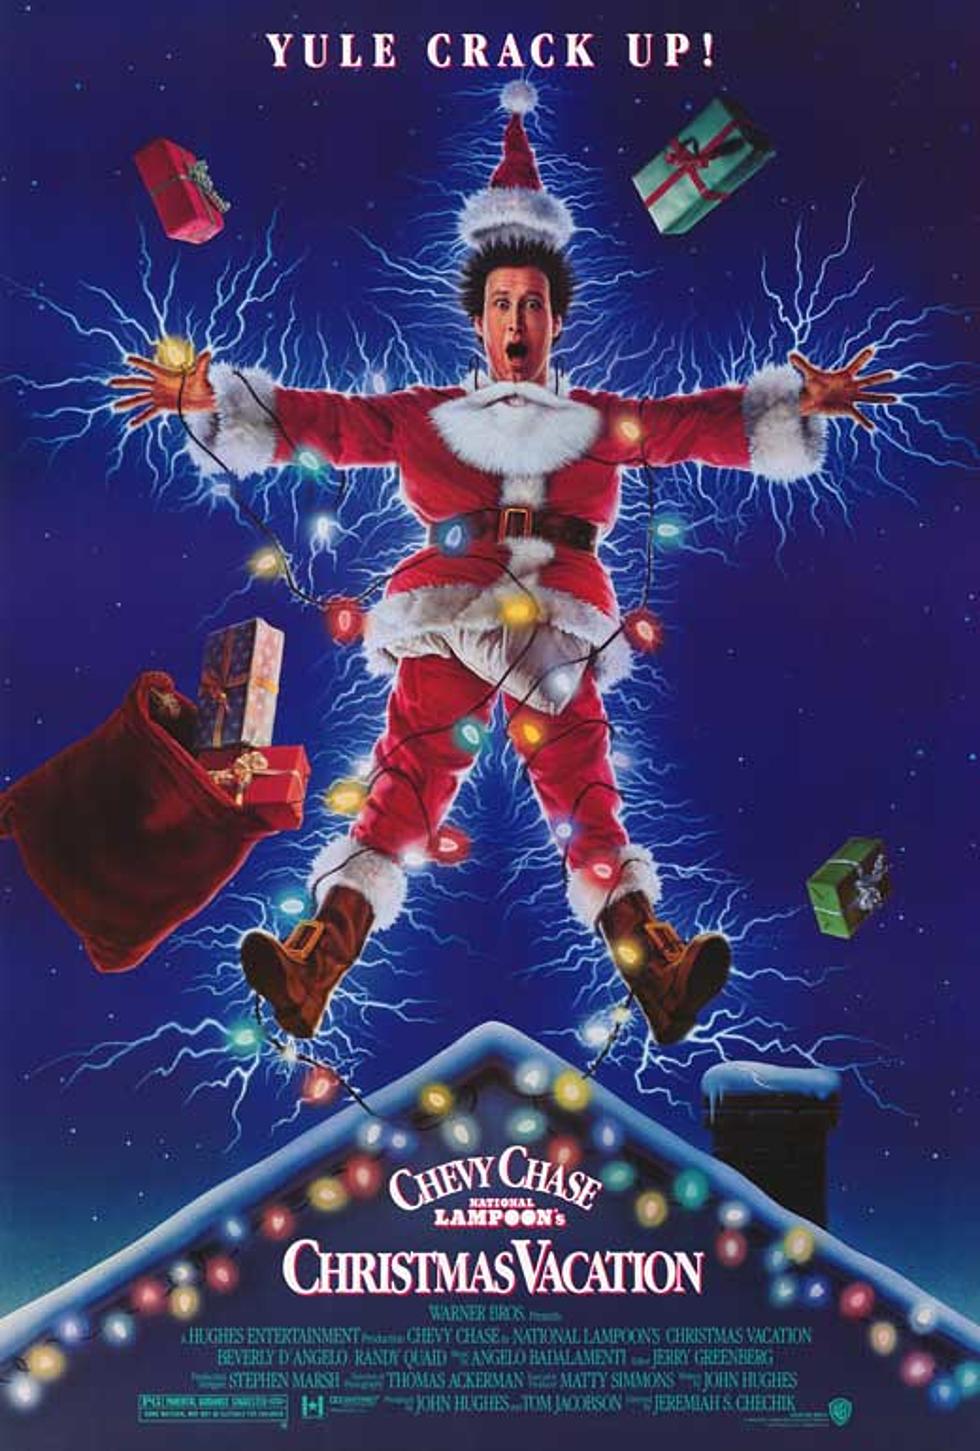 "Christmas Vacation" Pop Up Bar Coming To Chicago